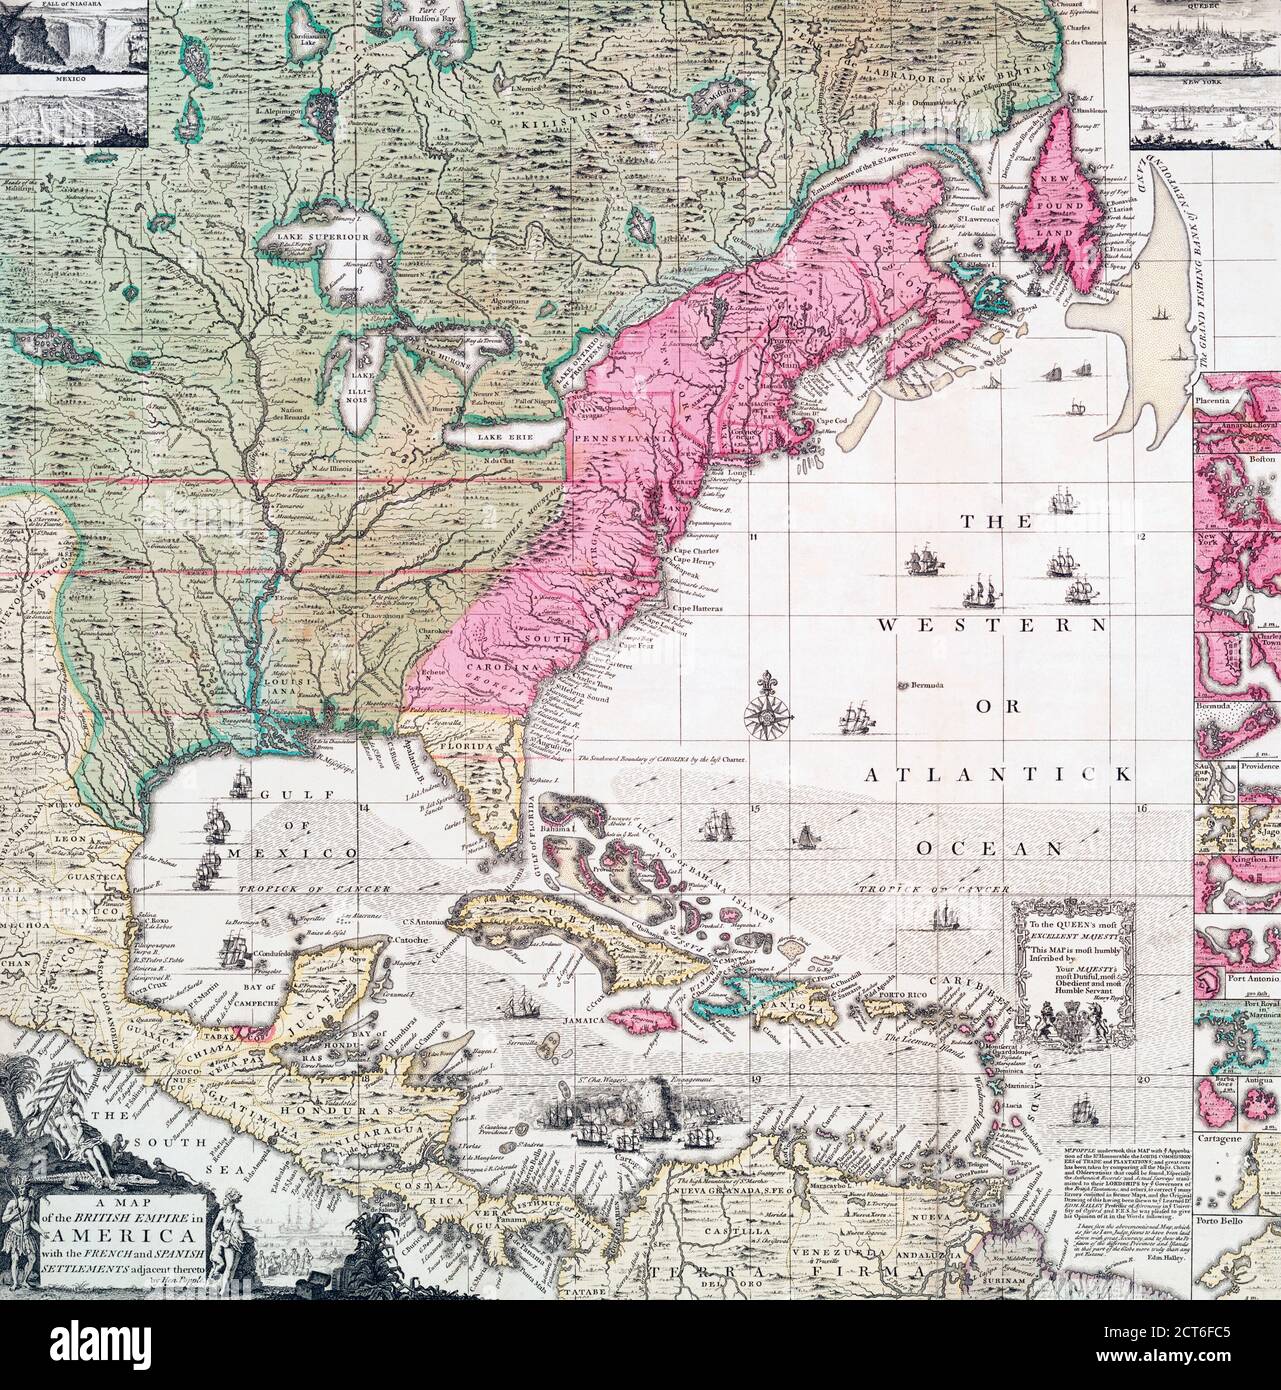 An early 18th century map of the British Empire in North America also showing French, Spanish and Dutch settlements.  After a work by British cartographer Henry Popple, ? - died 1743. Stock Photo